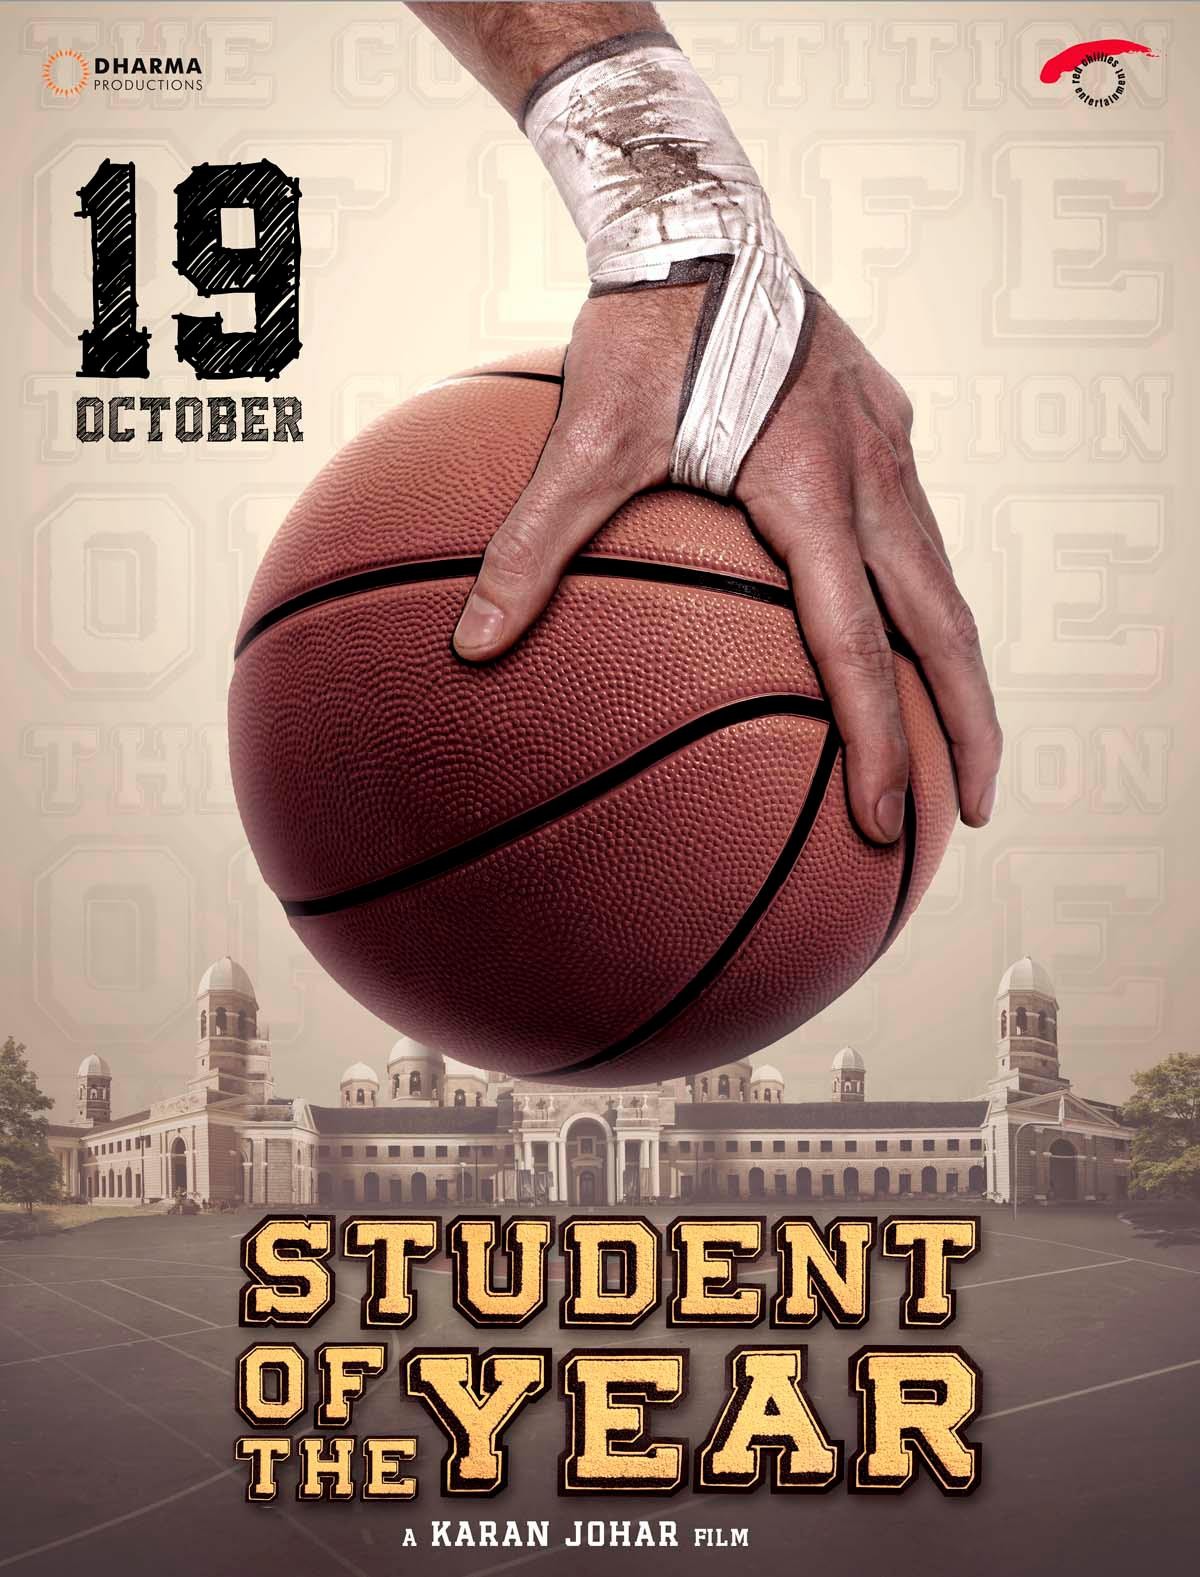 Poster of Eros International's Student of the Year (2012)